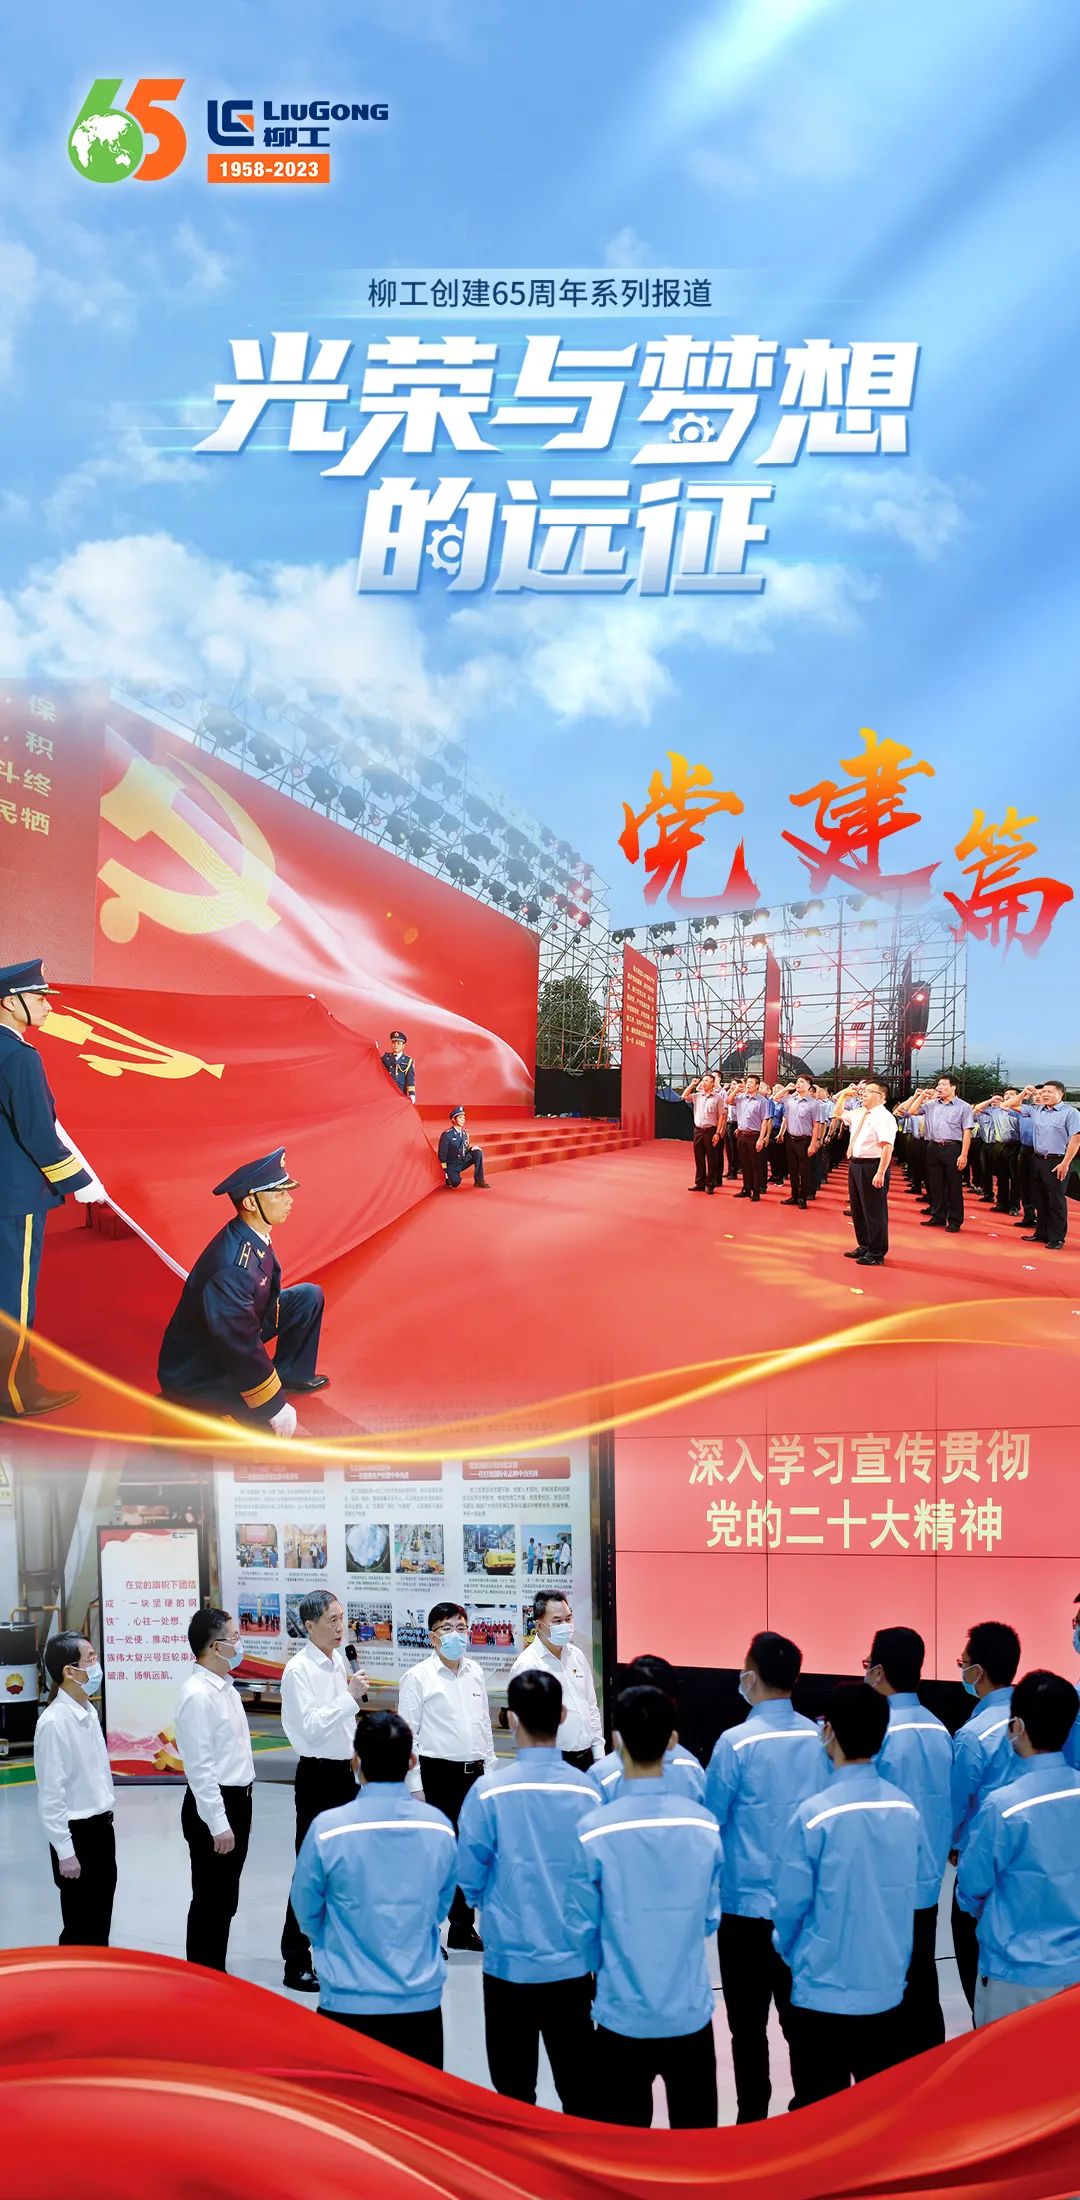 [65th Anniversary · Party Building Chapter] Liugong Activates the "Red Engine" to Lead the High-quality Development of Enterprises with High-quality Party Building